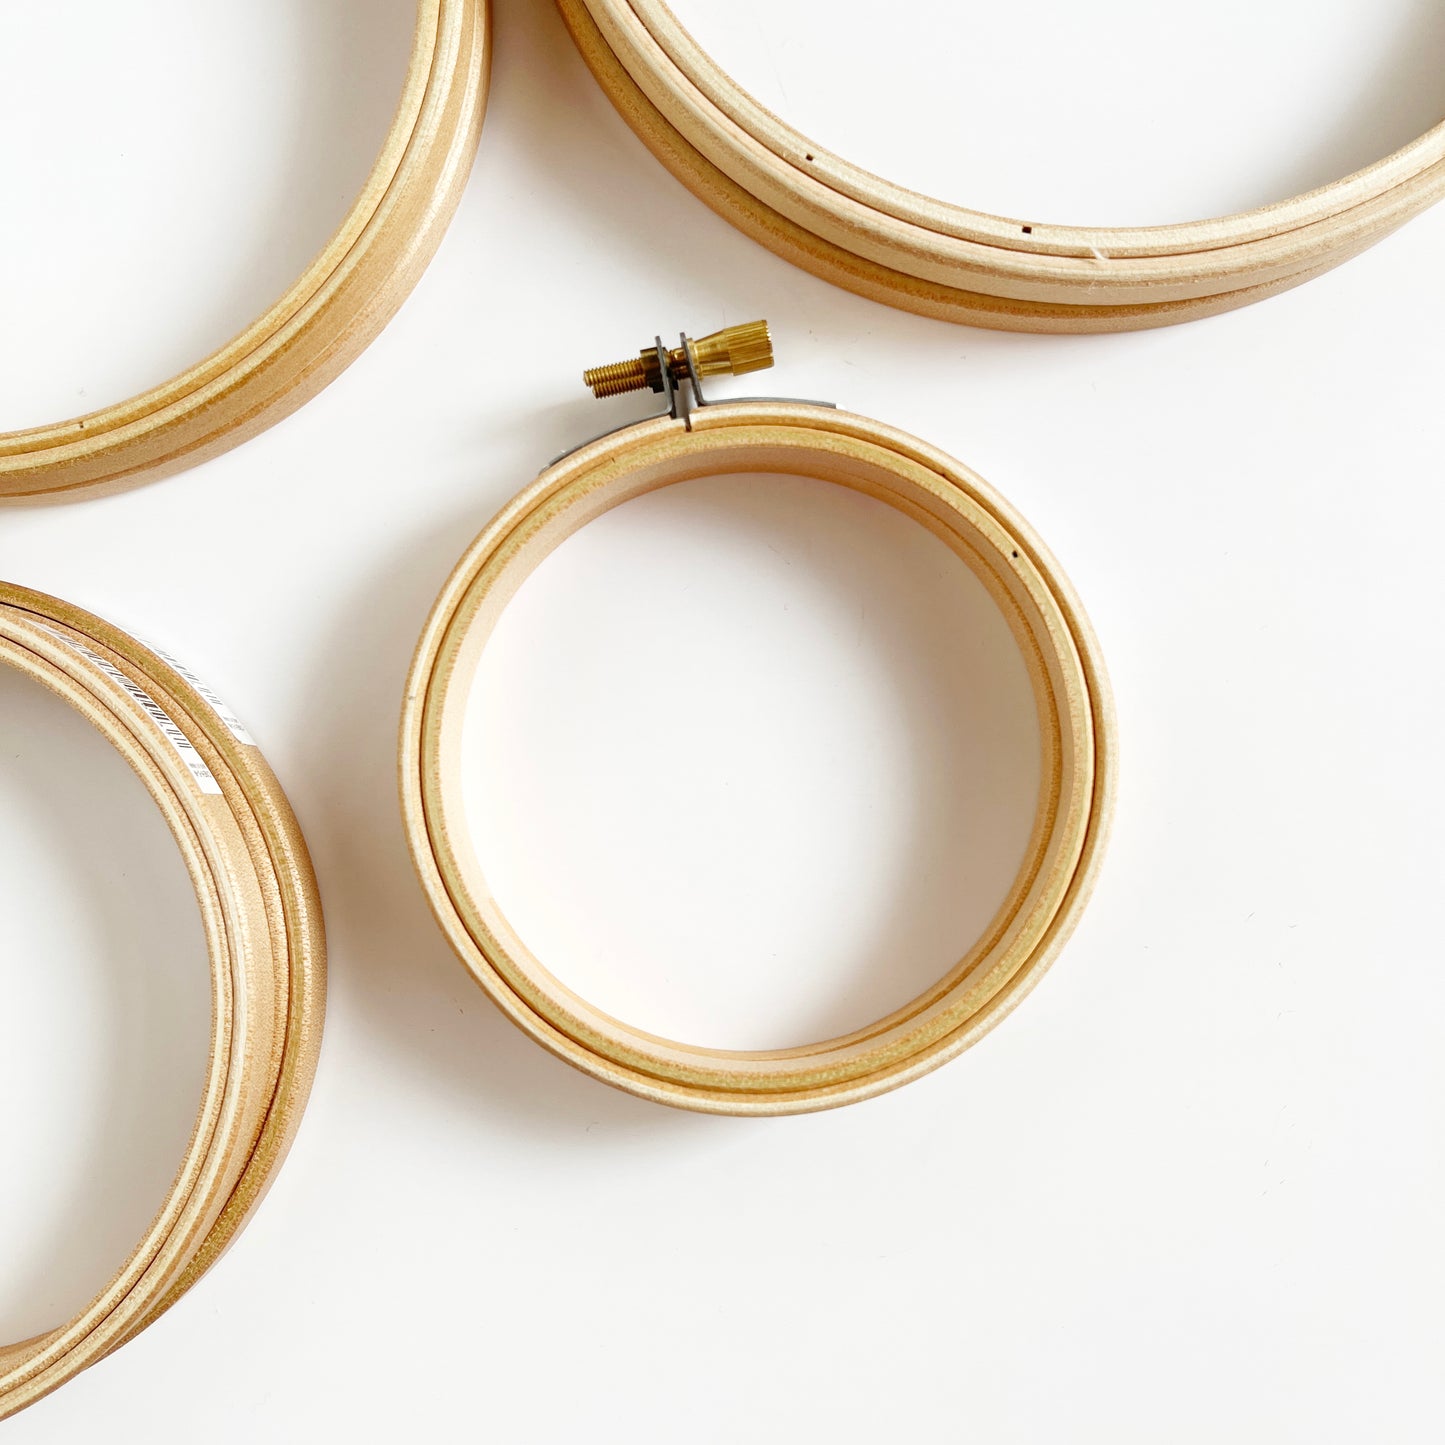 Wooden Embroidery Hoops